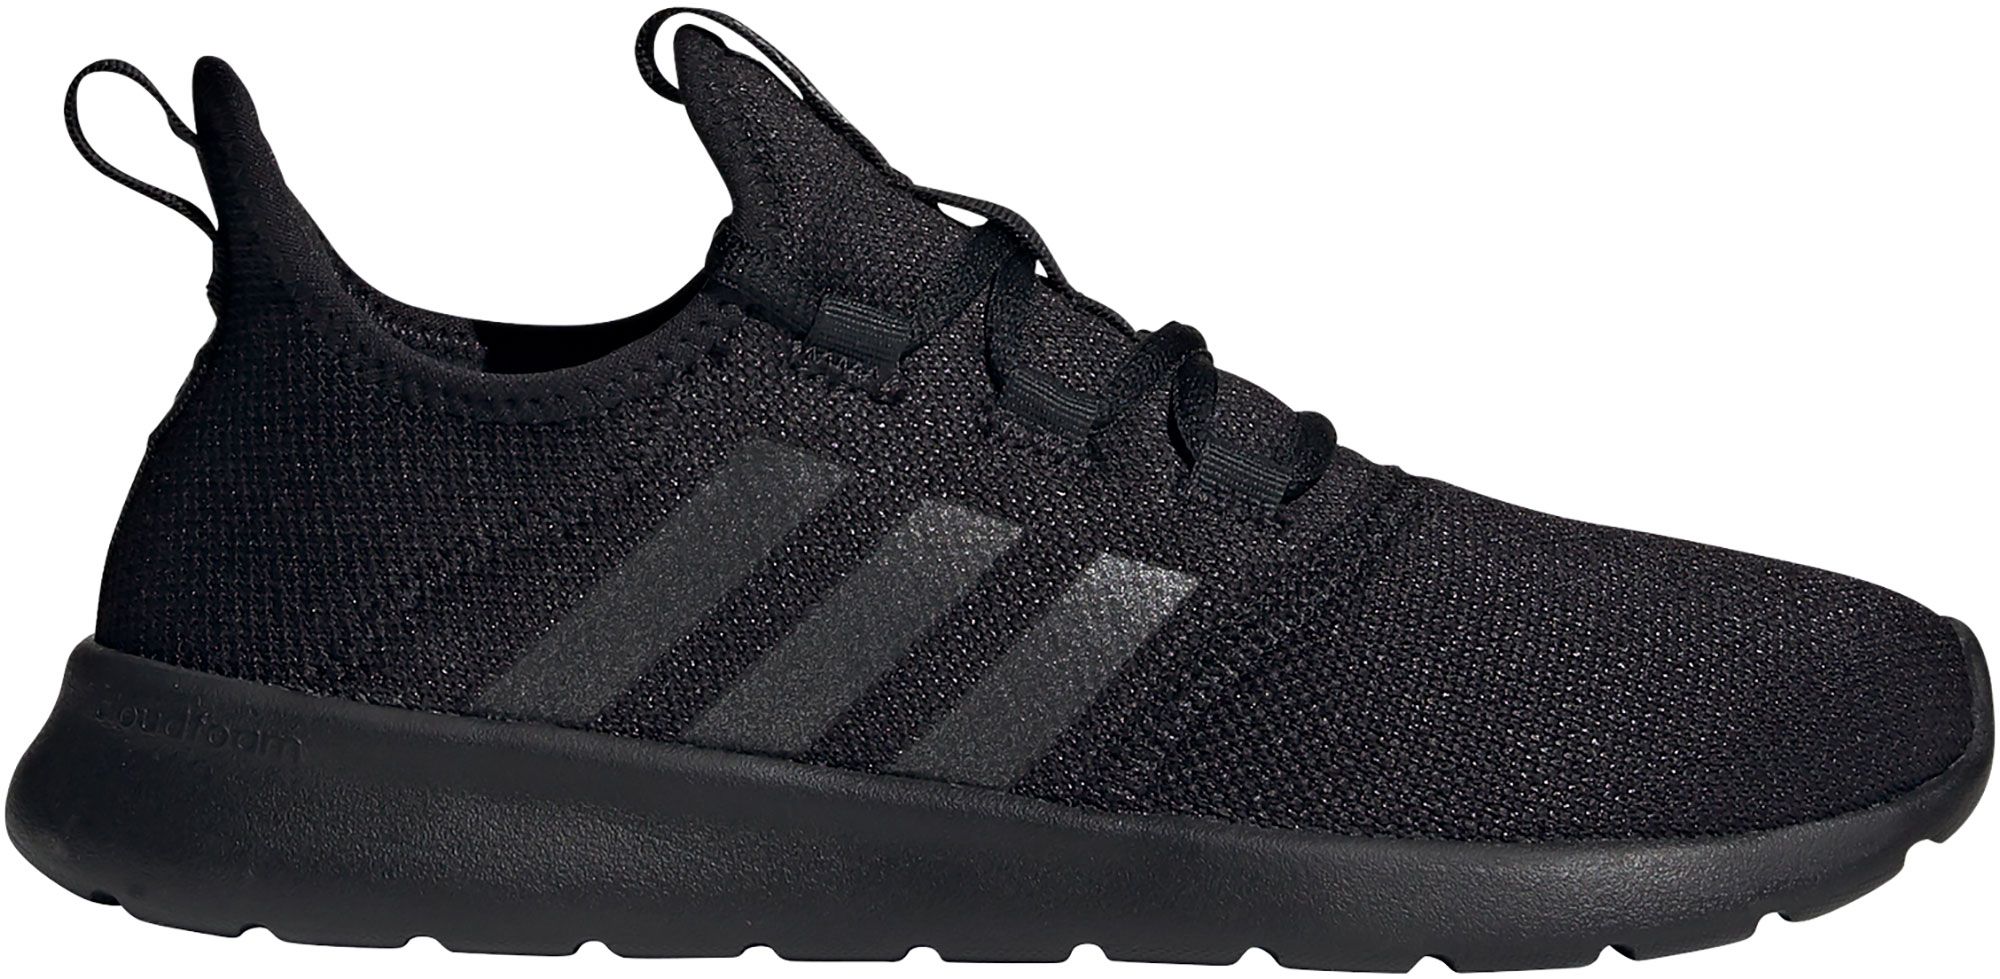 adidas cloudfoam shoes for running